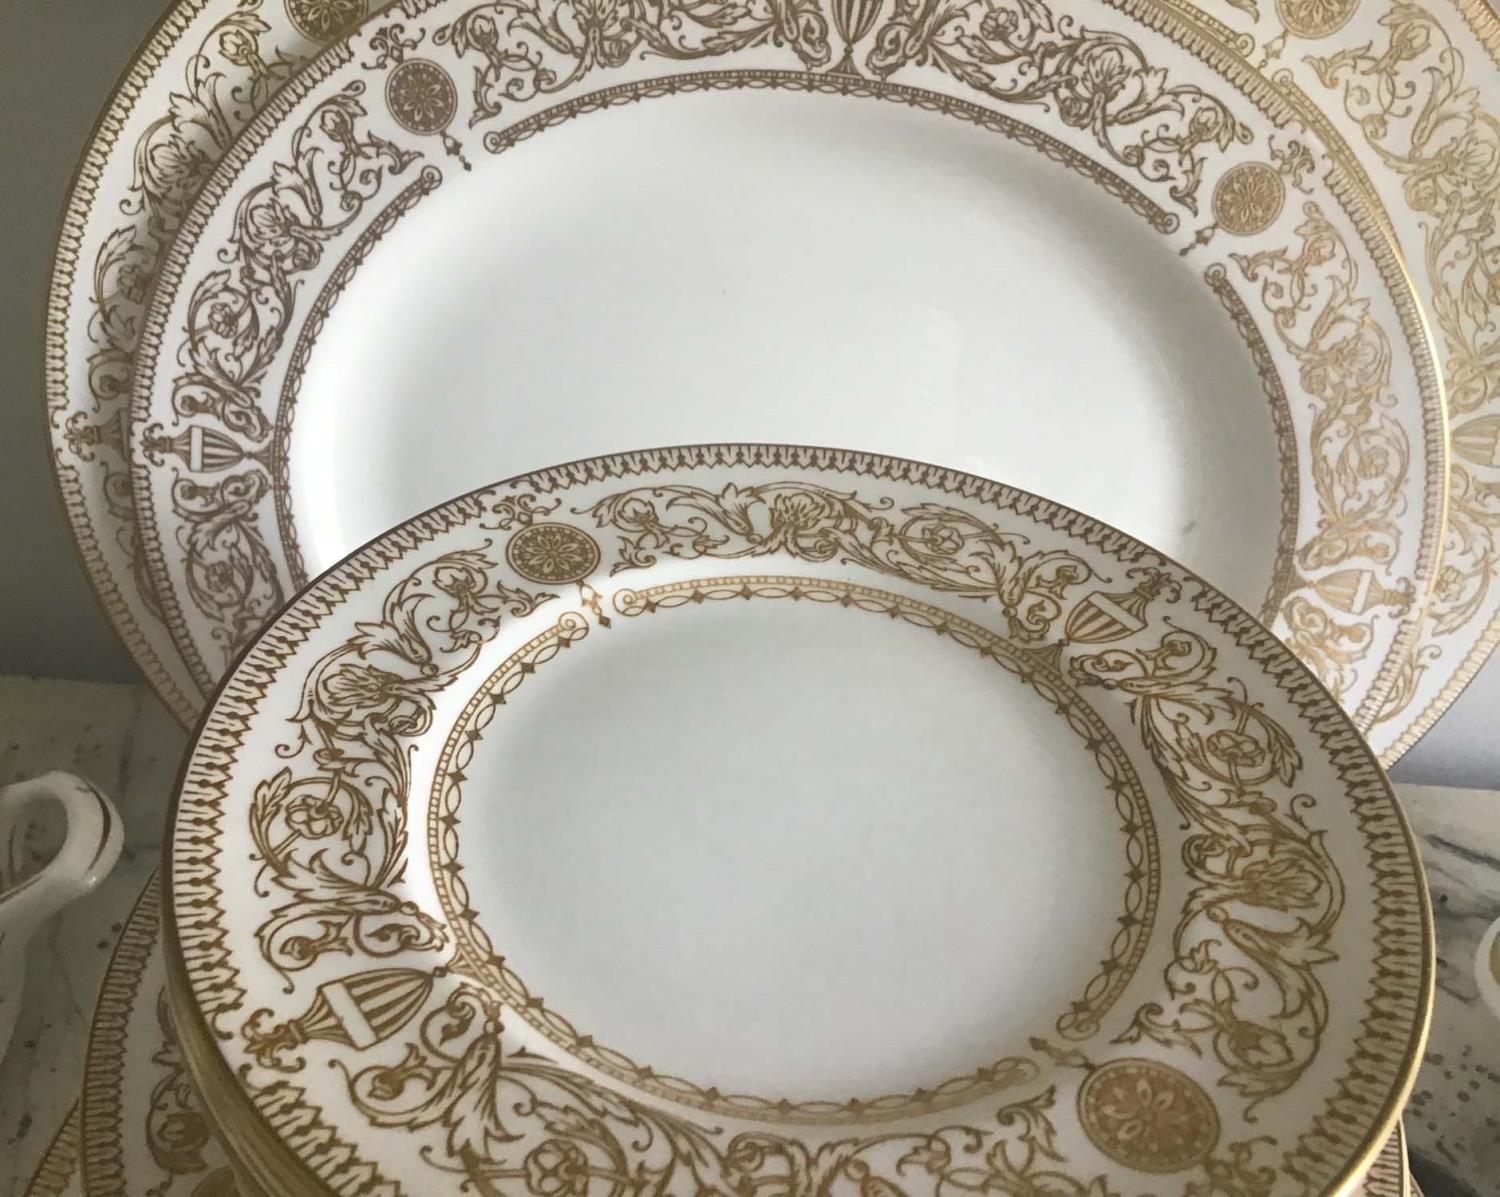 DINNER SERVICE, English fine bone china, Hyde park, 12 place, 5 piece settings, approx 68 pieces. ( - Image 4 of 5